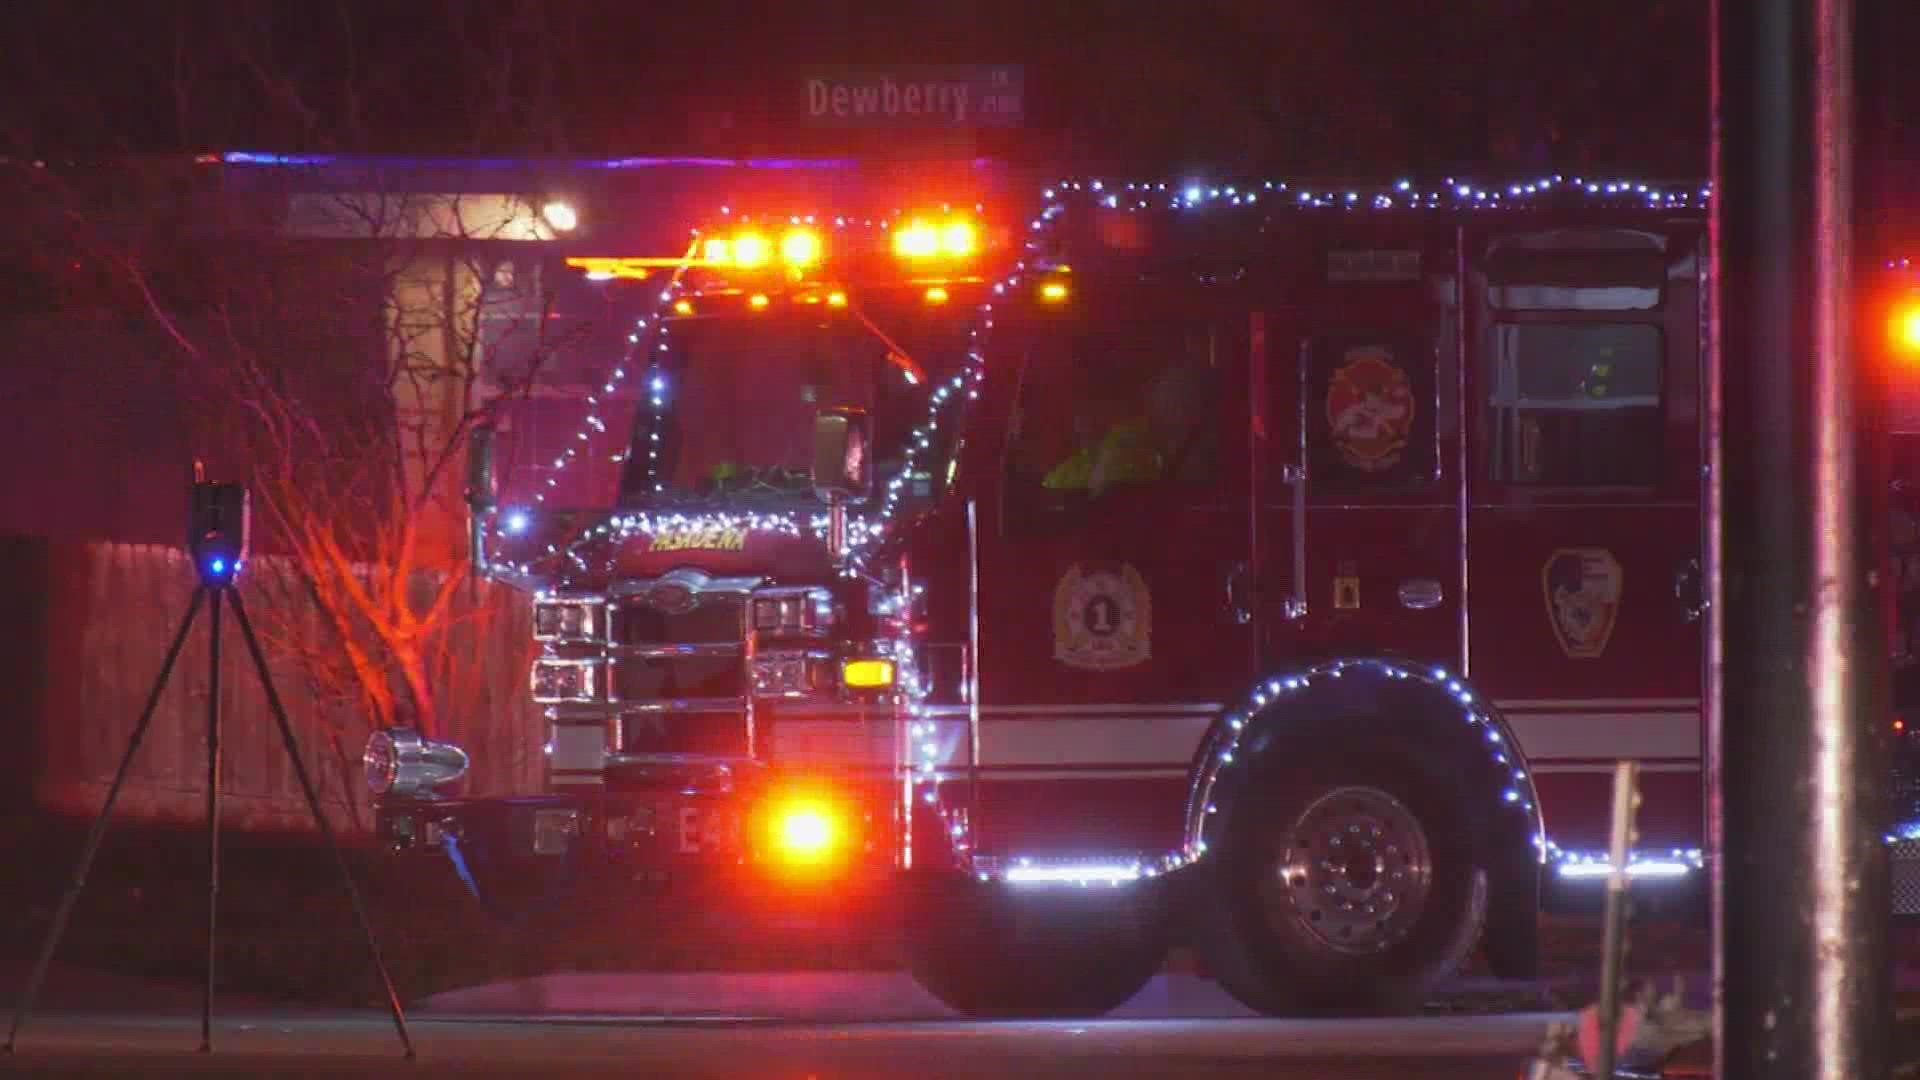 A firefighter with the Pasadena Fire Department is in the hospital with severe injuries after being struck by a hit-and-run driver Saturday night.